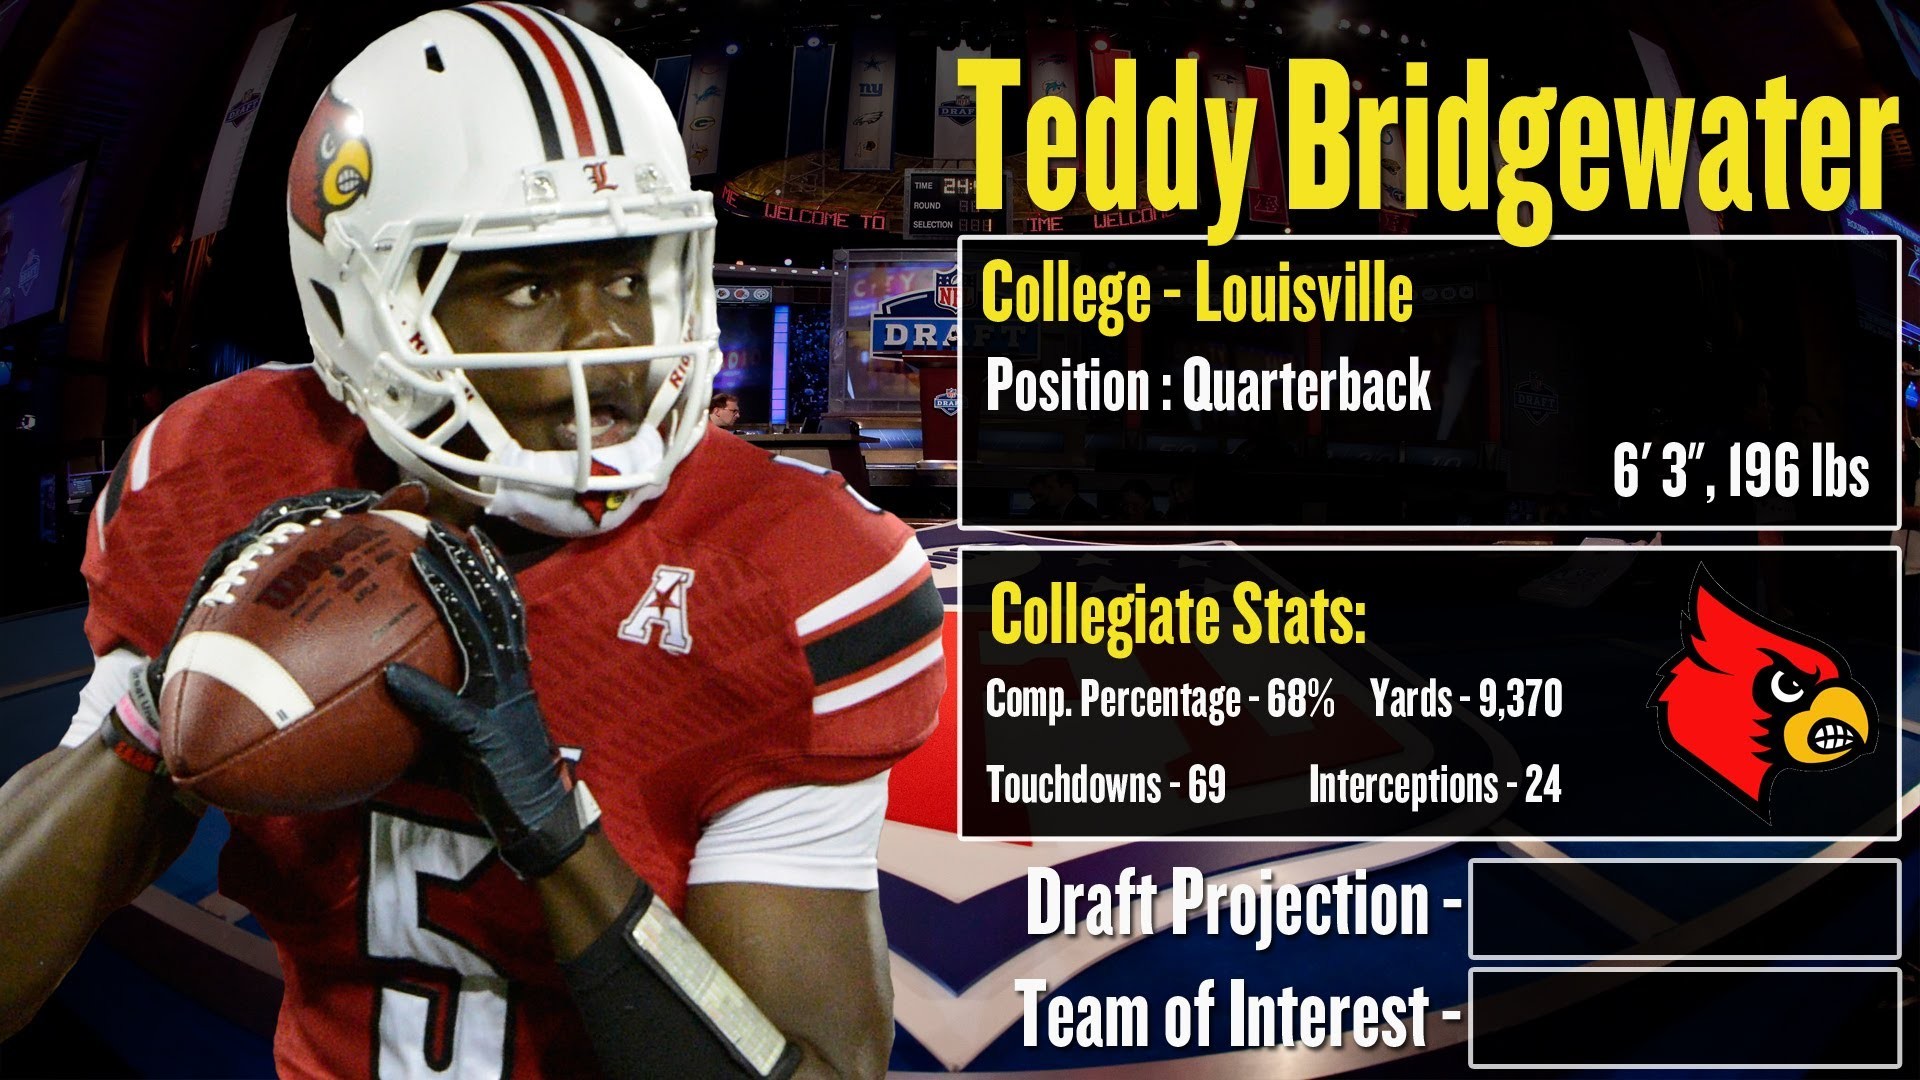 1920x1080 2014 NFL Draft Profile: Teddy Bridgewater - Strengths and Weaknesses +  Projection! - YouTube